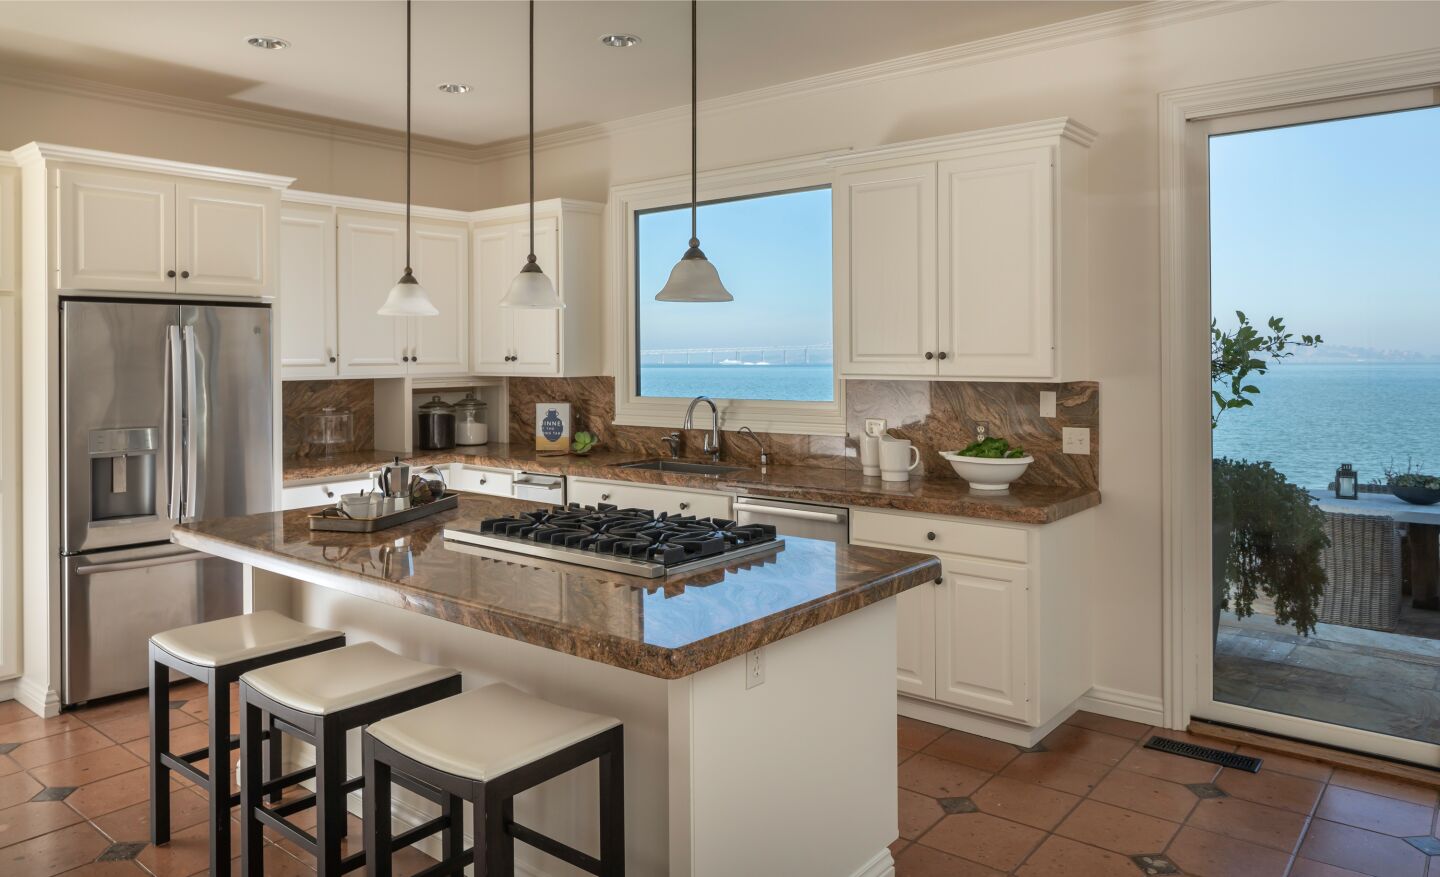 The kitchen with windows overlooking the bay.